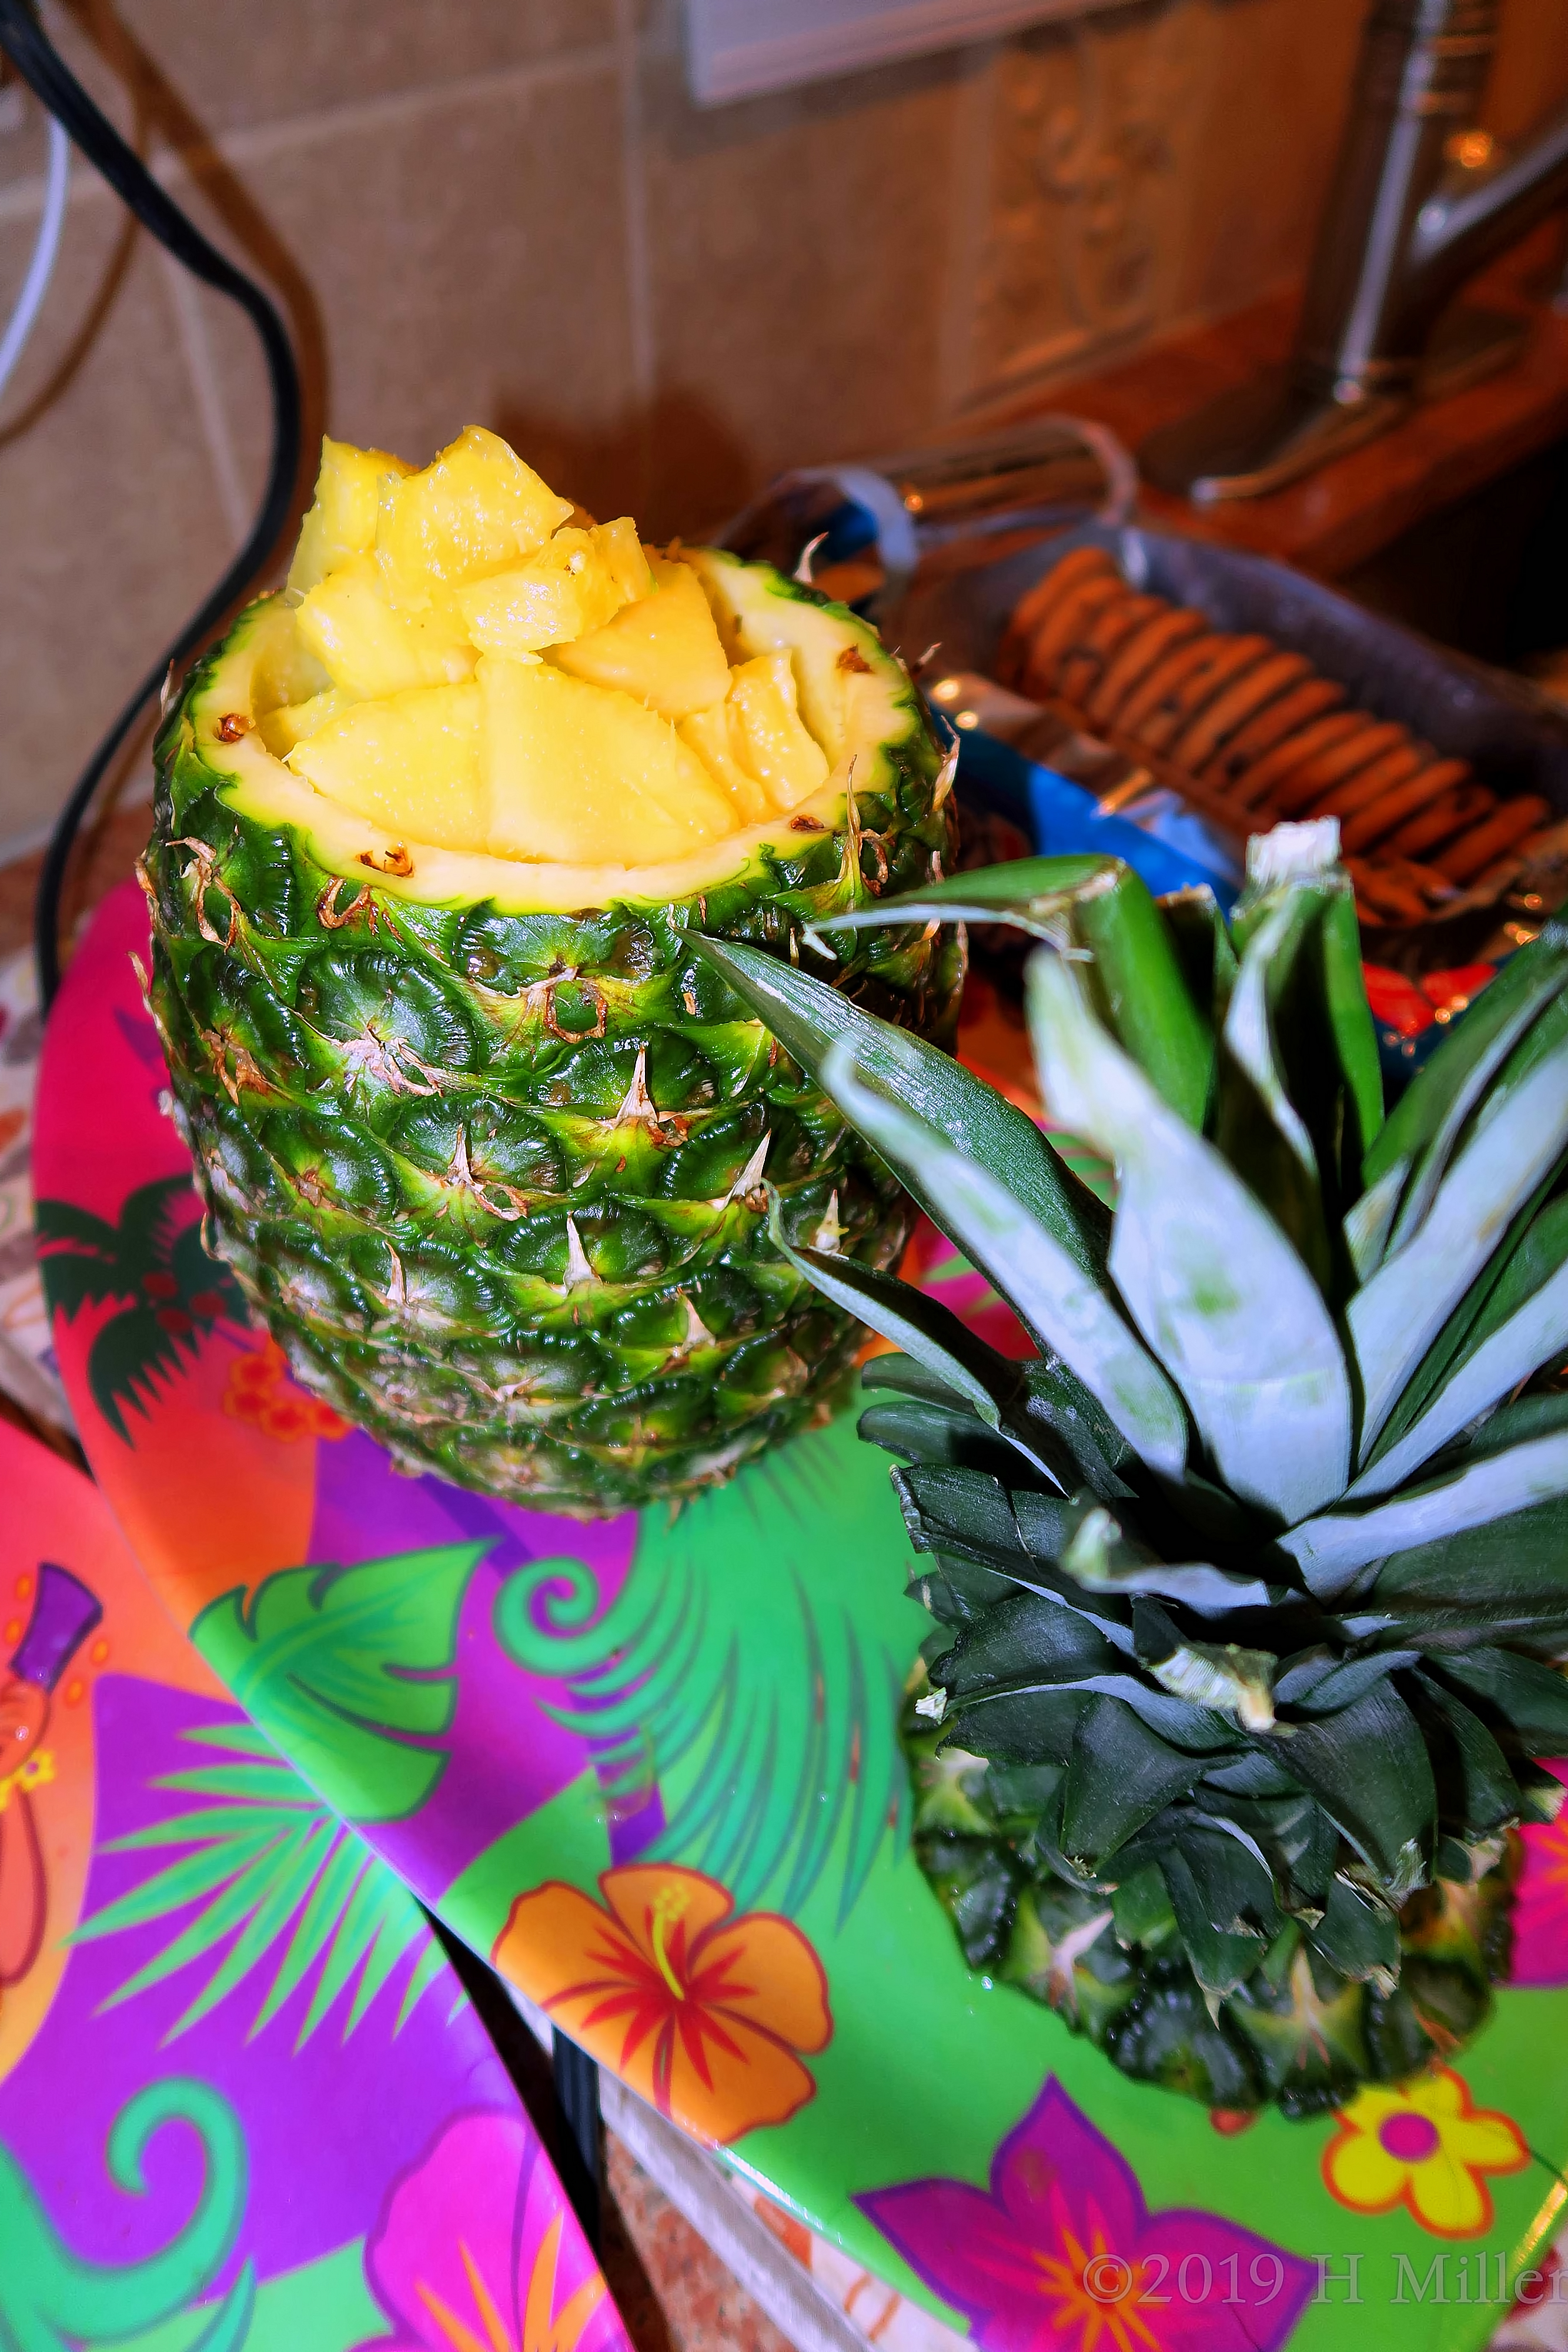 Sweet And Juicy Pineapple For Chocolate Dipping!